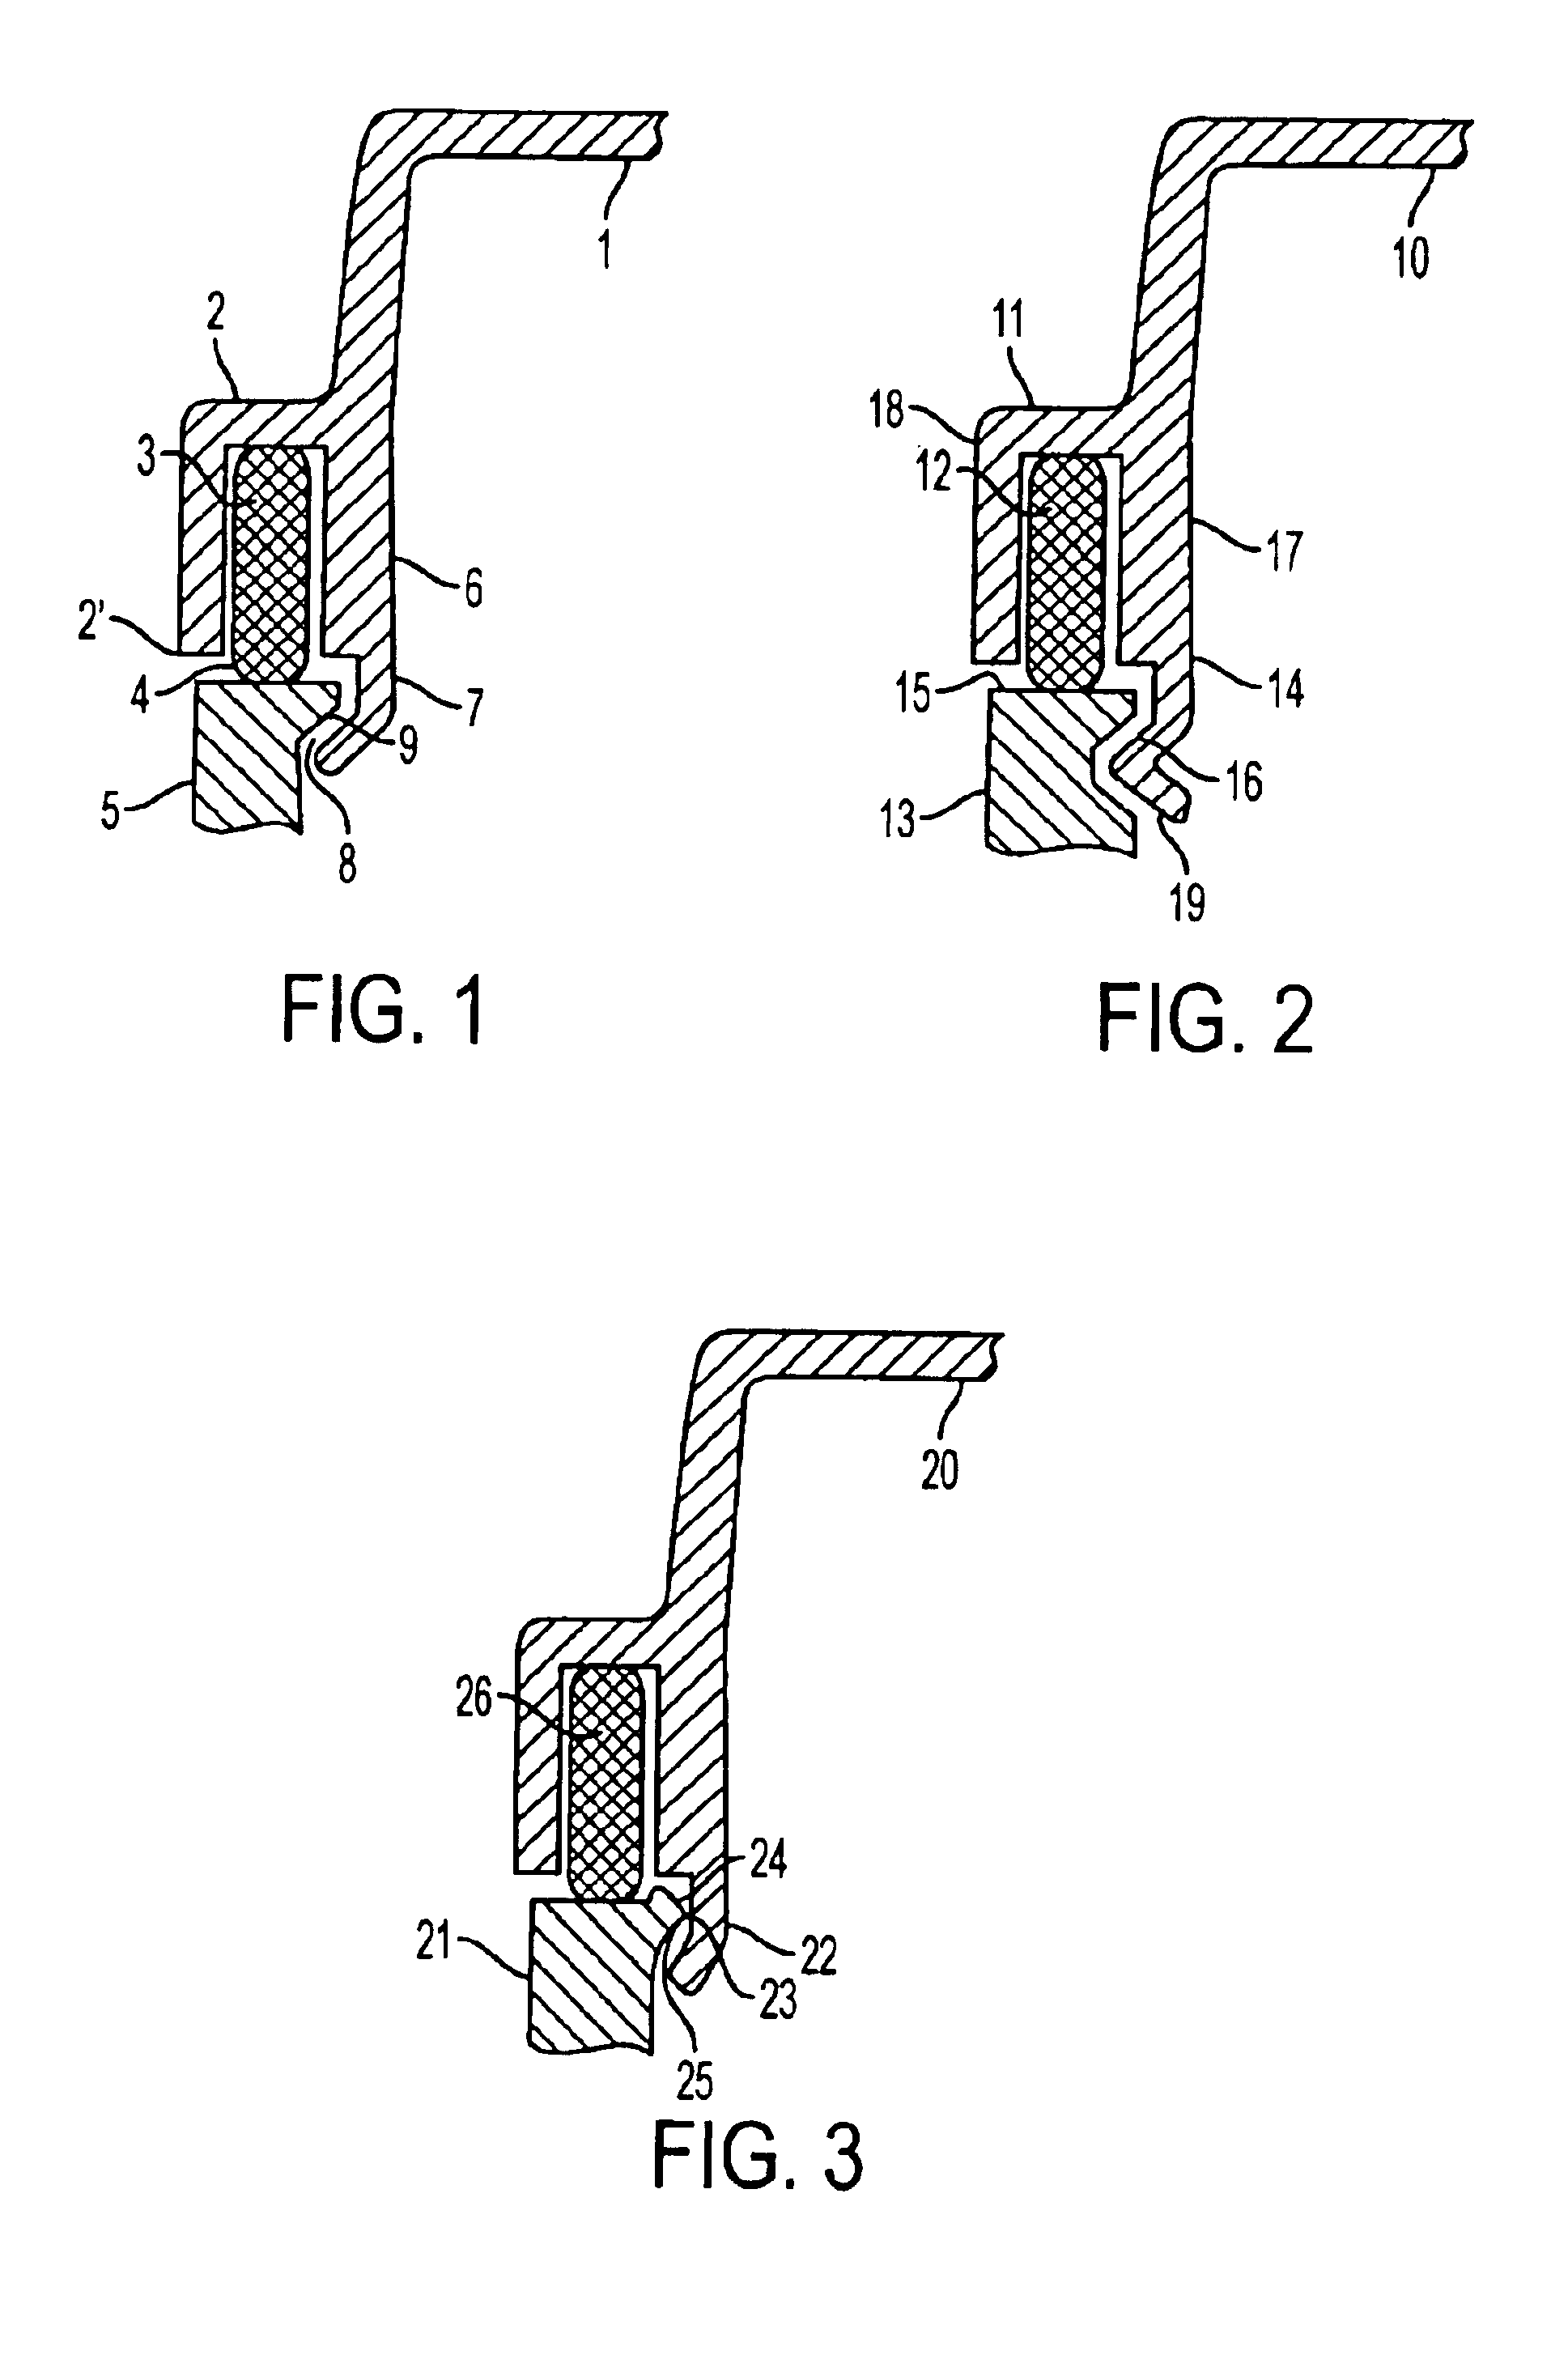 Casing cover having a device for assuring sealing forces